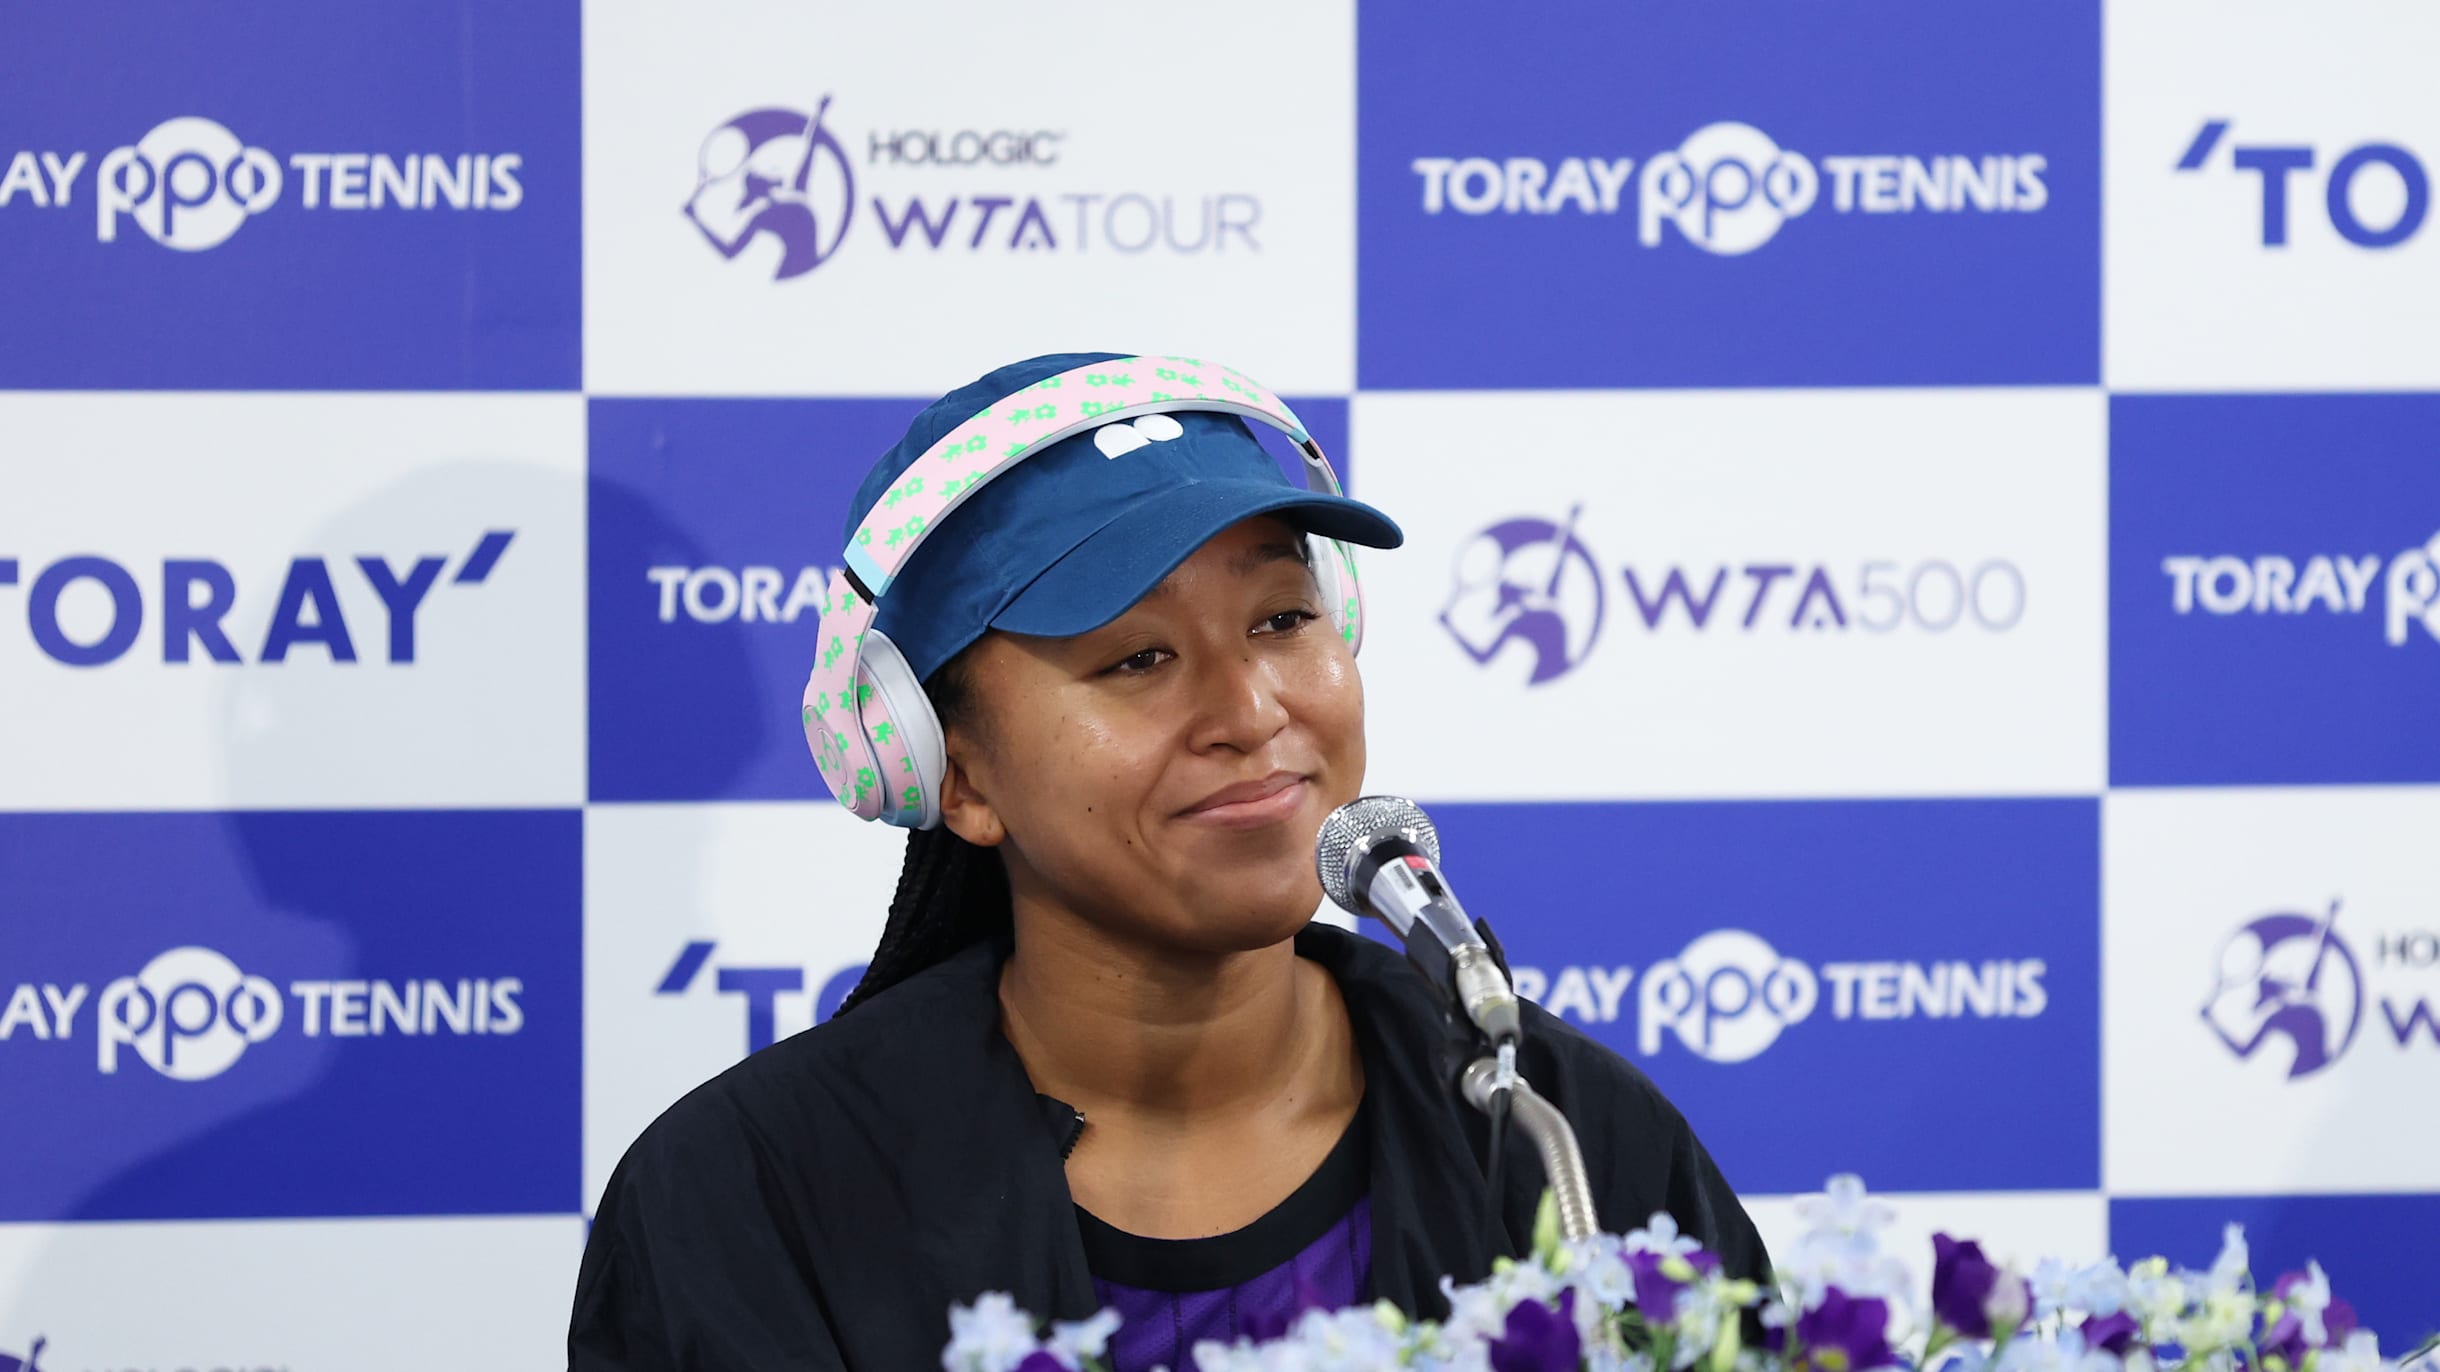 Naomi Osaka Stars in Olympics 'Stronger Together' Campaign